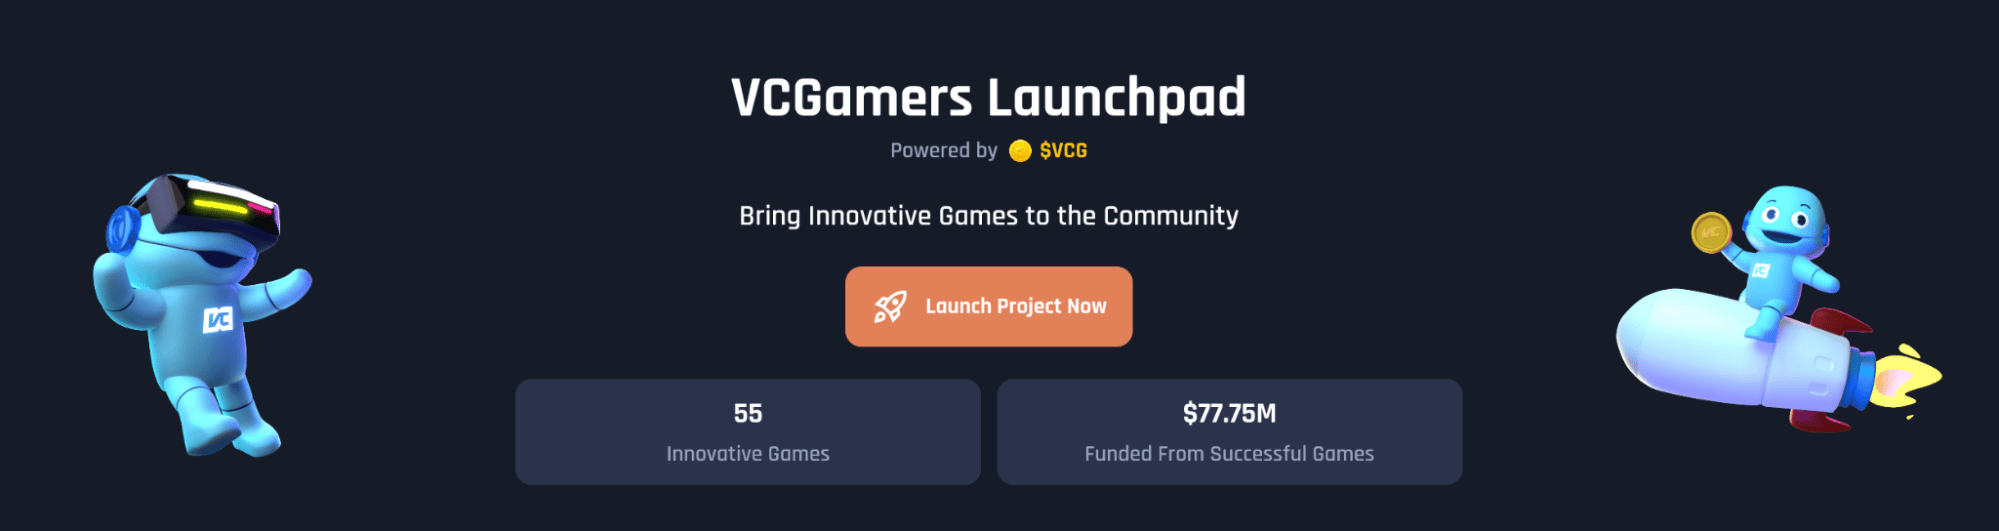 how to register vcgamers launchpad (4)